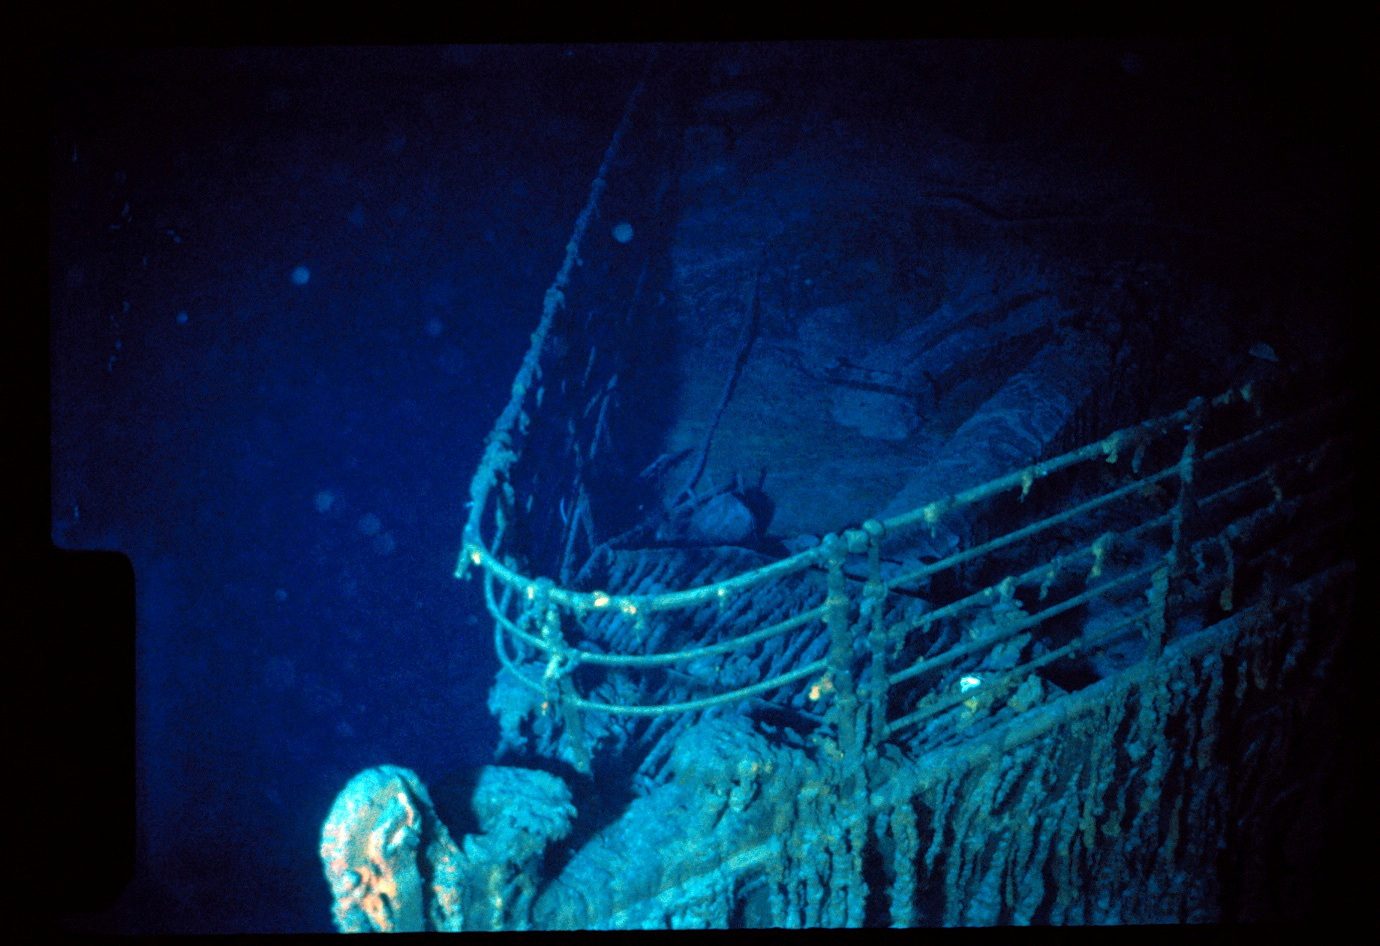 Ships, Planes Search for Missing Sub Near Titanic Wreckage